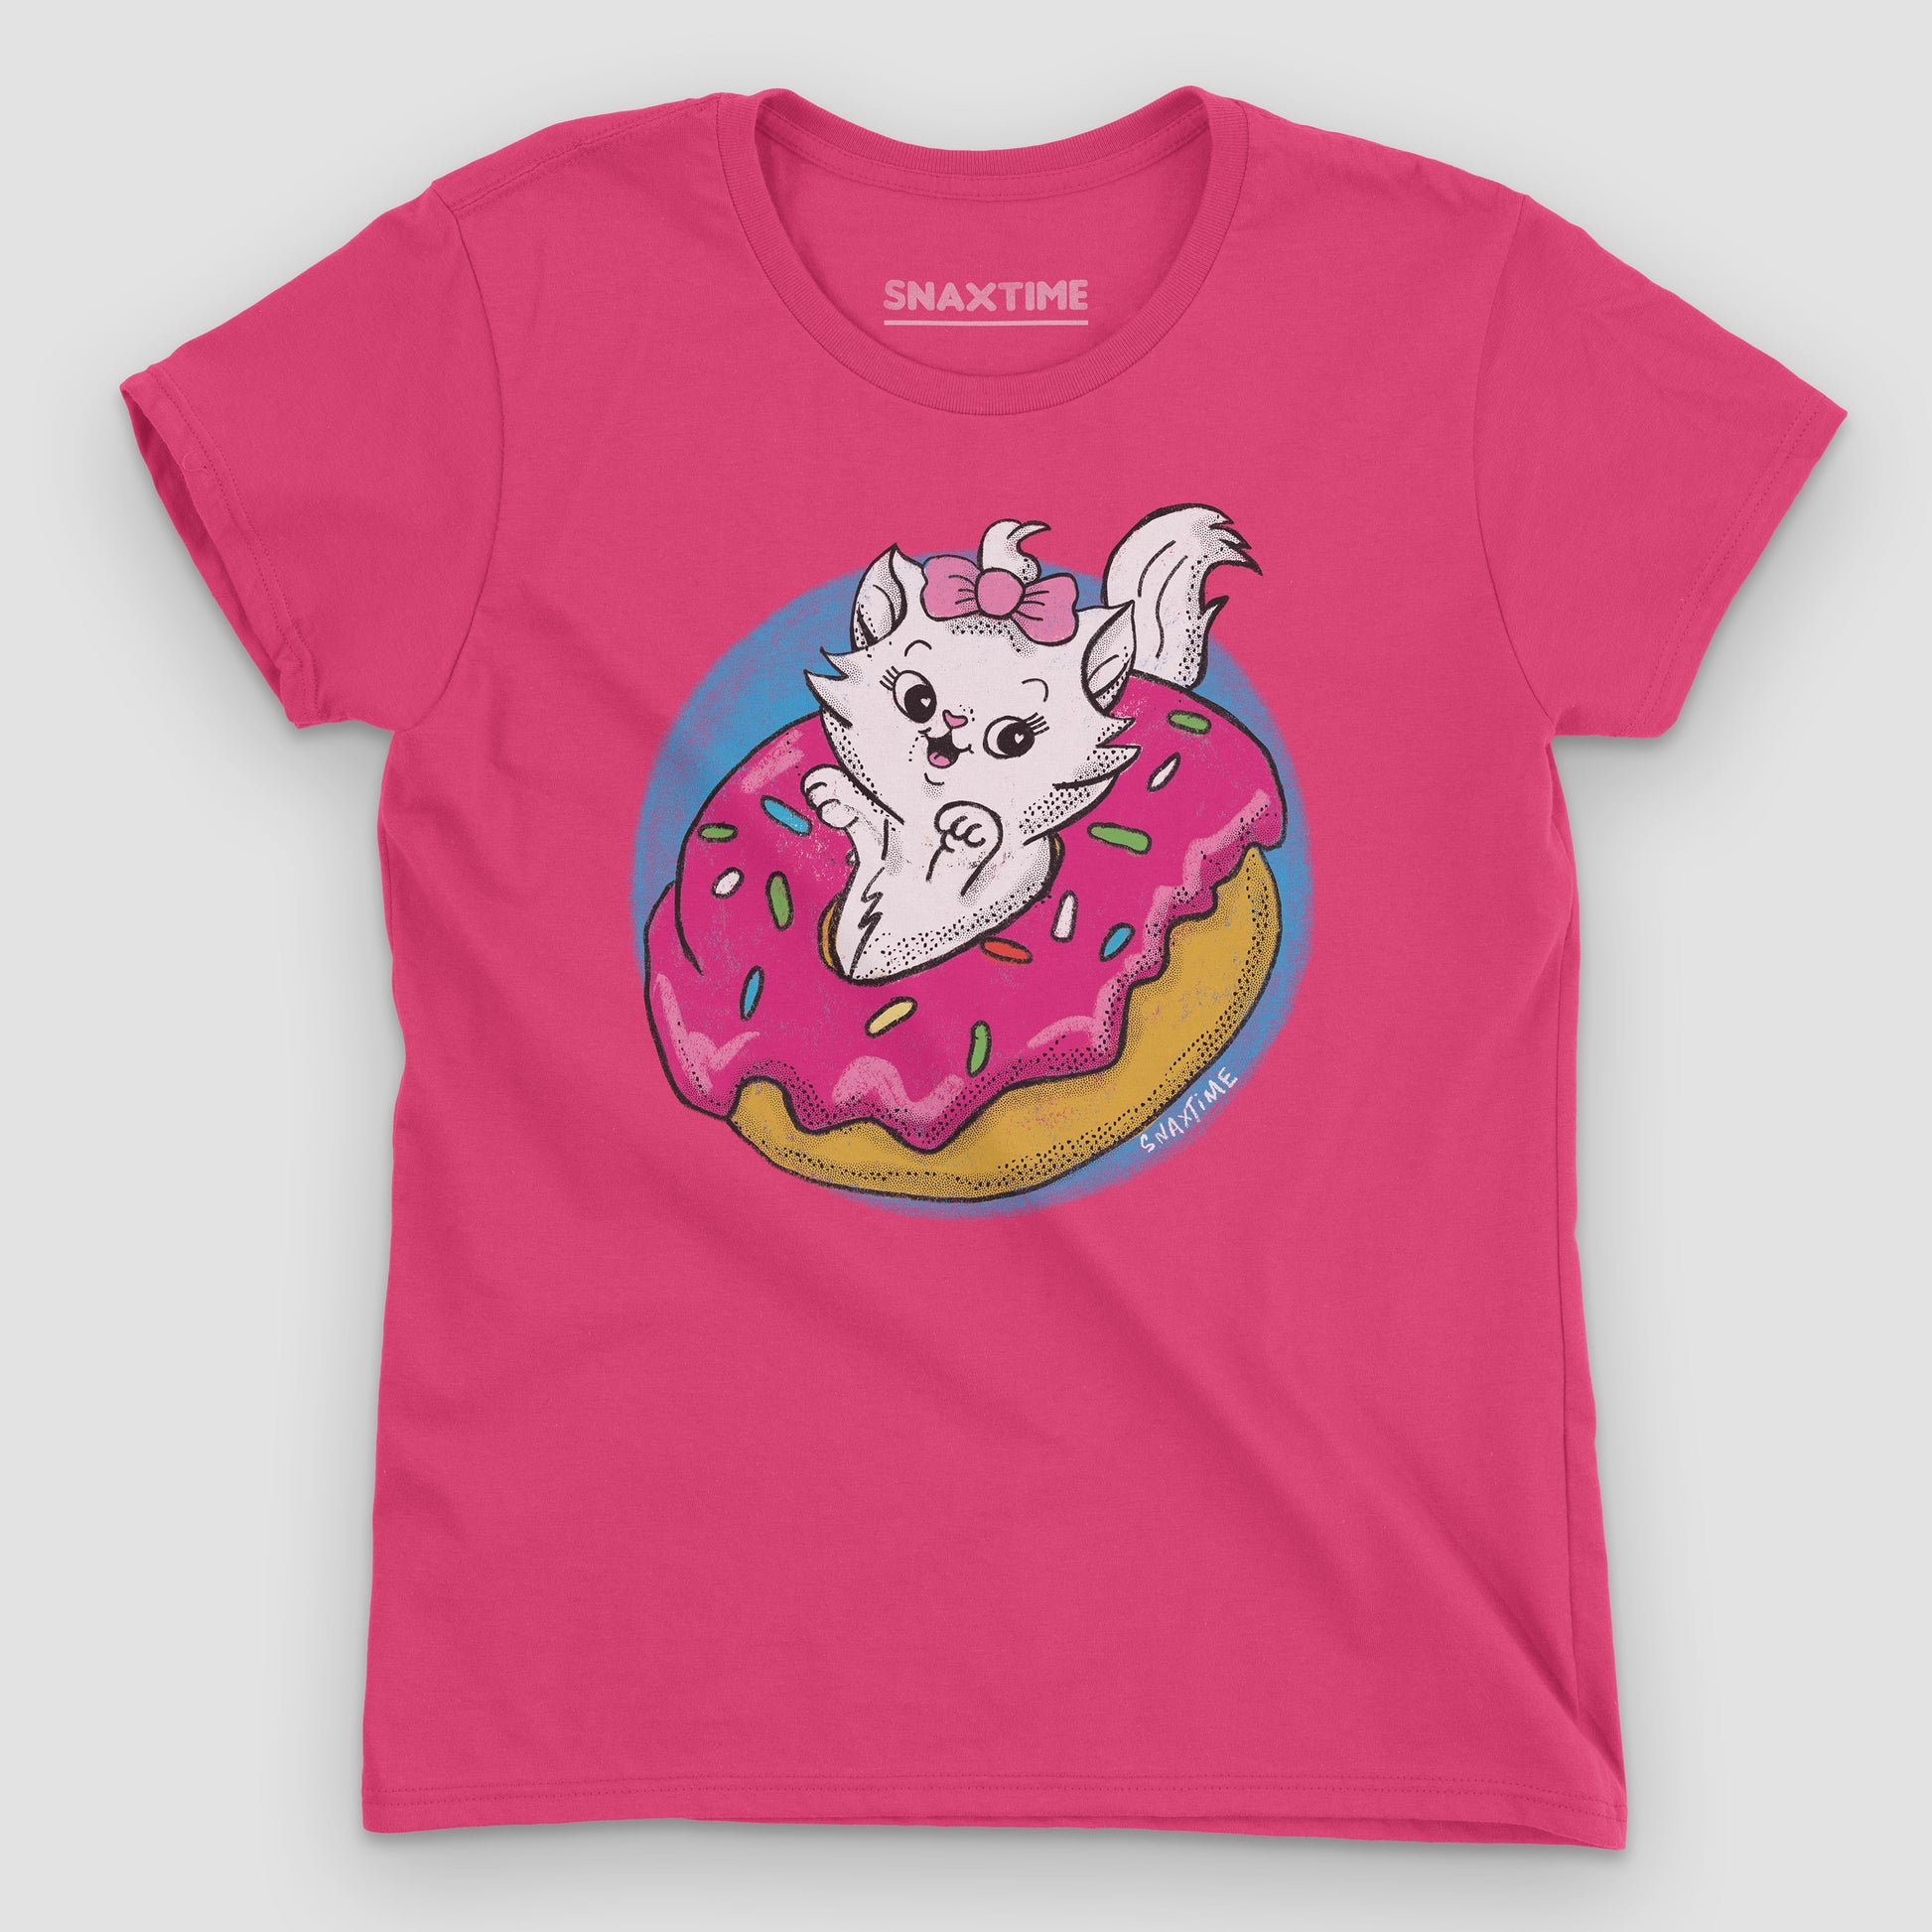 Hot Pink Donut Kitty Women's Graphic T-Shirt by Snaxtime